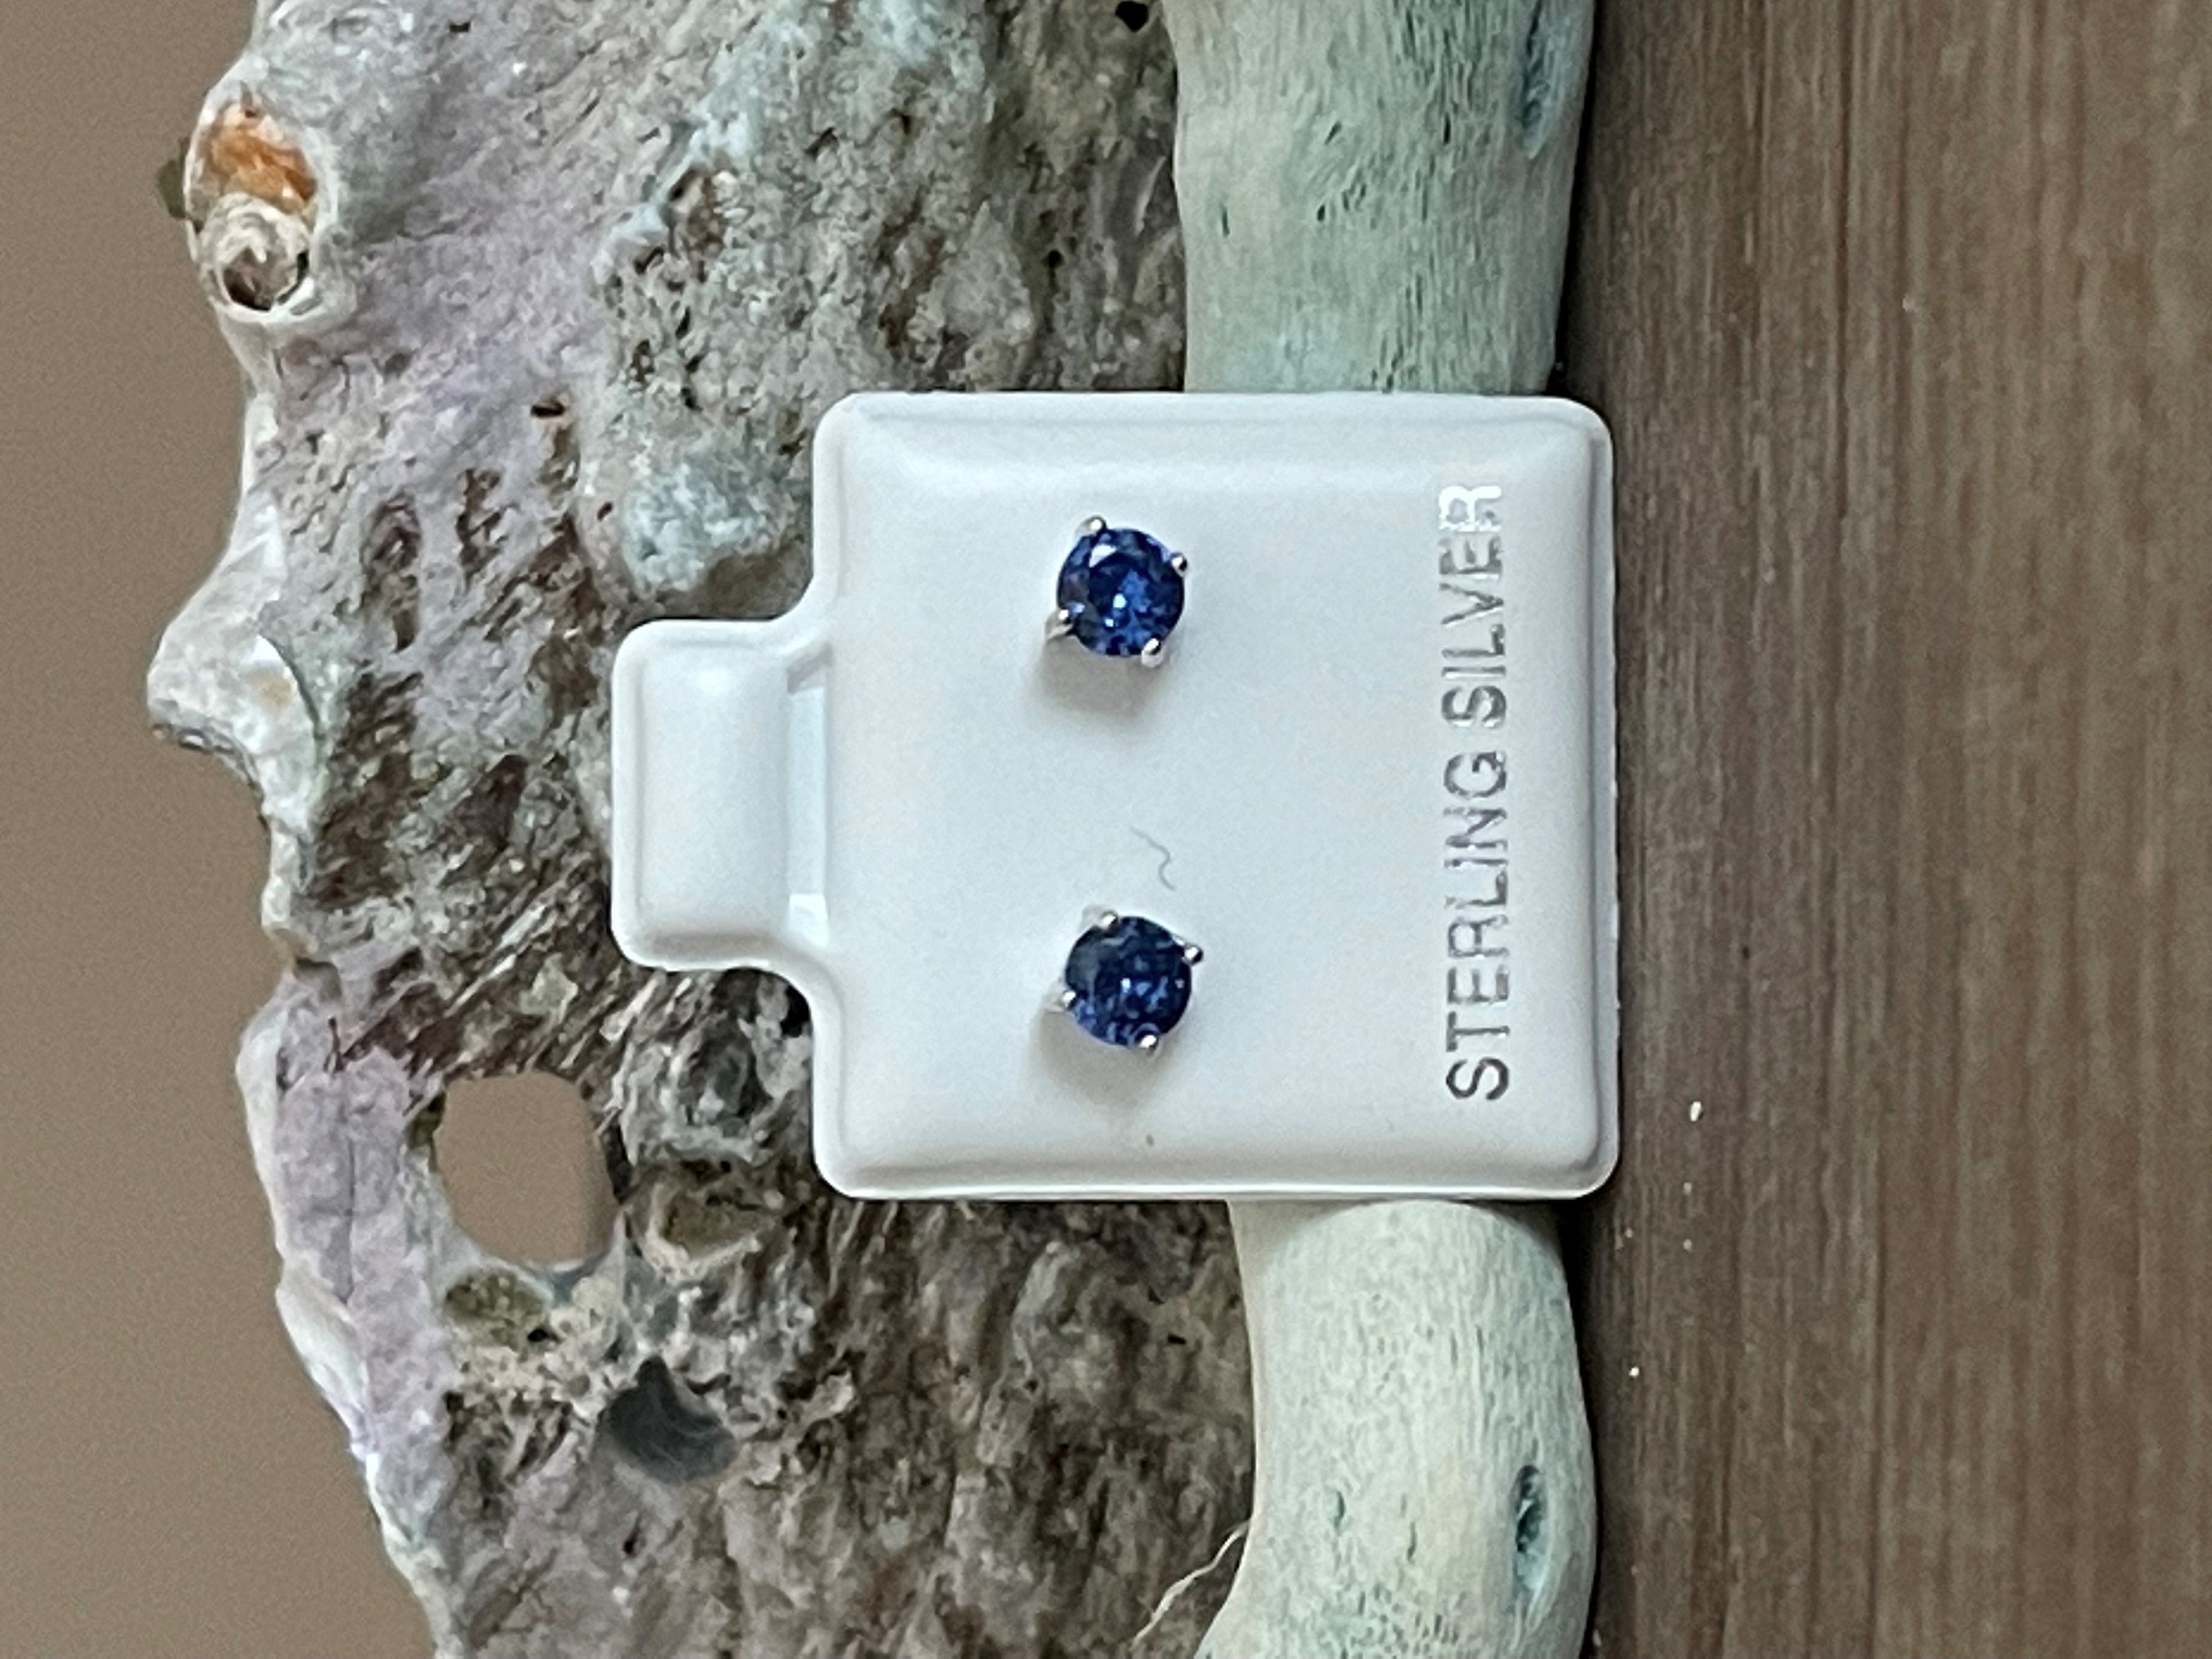 Sterling Silver Round 4mm CZ Color Birthstone Stud Earrings